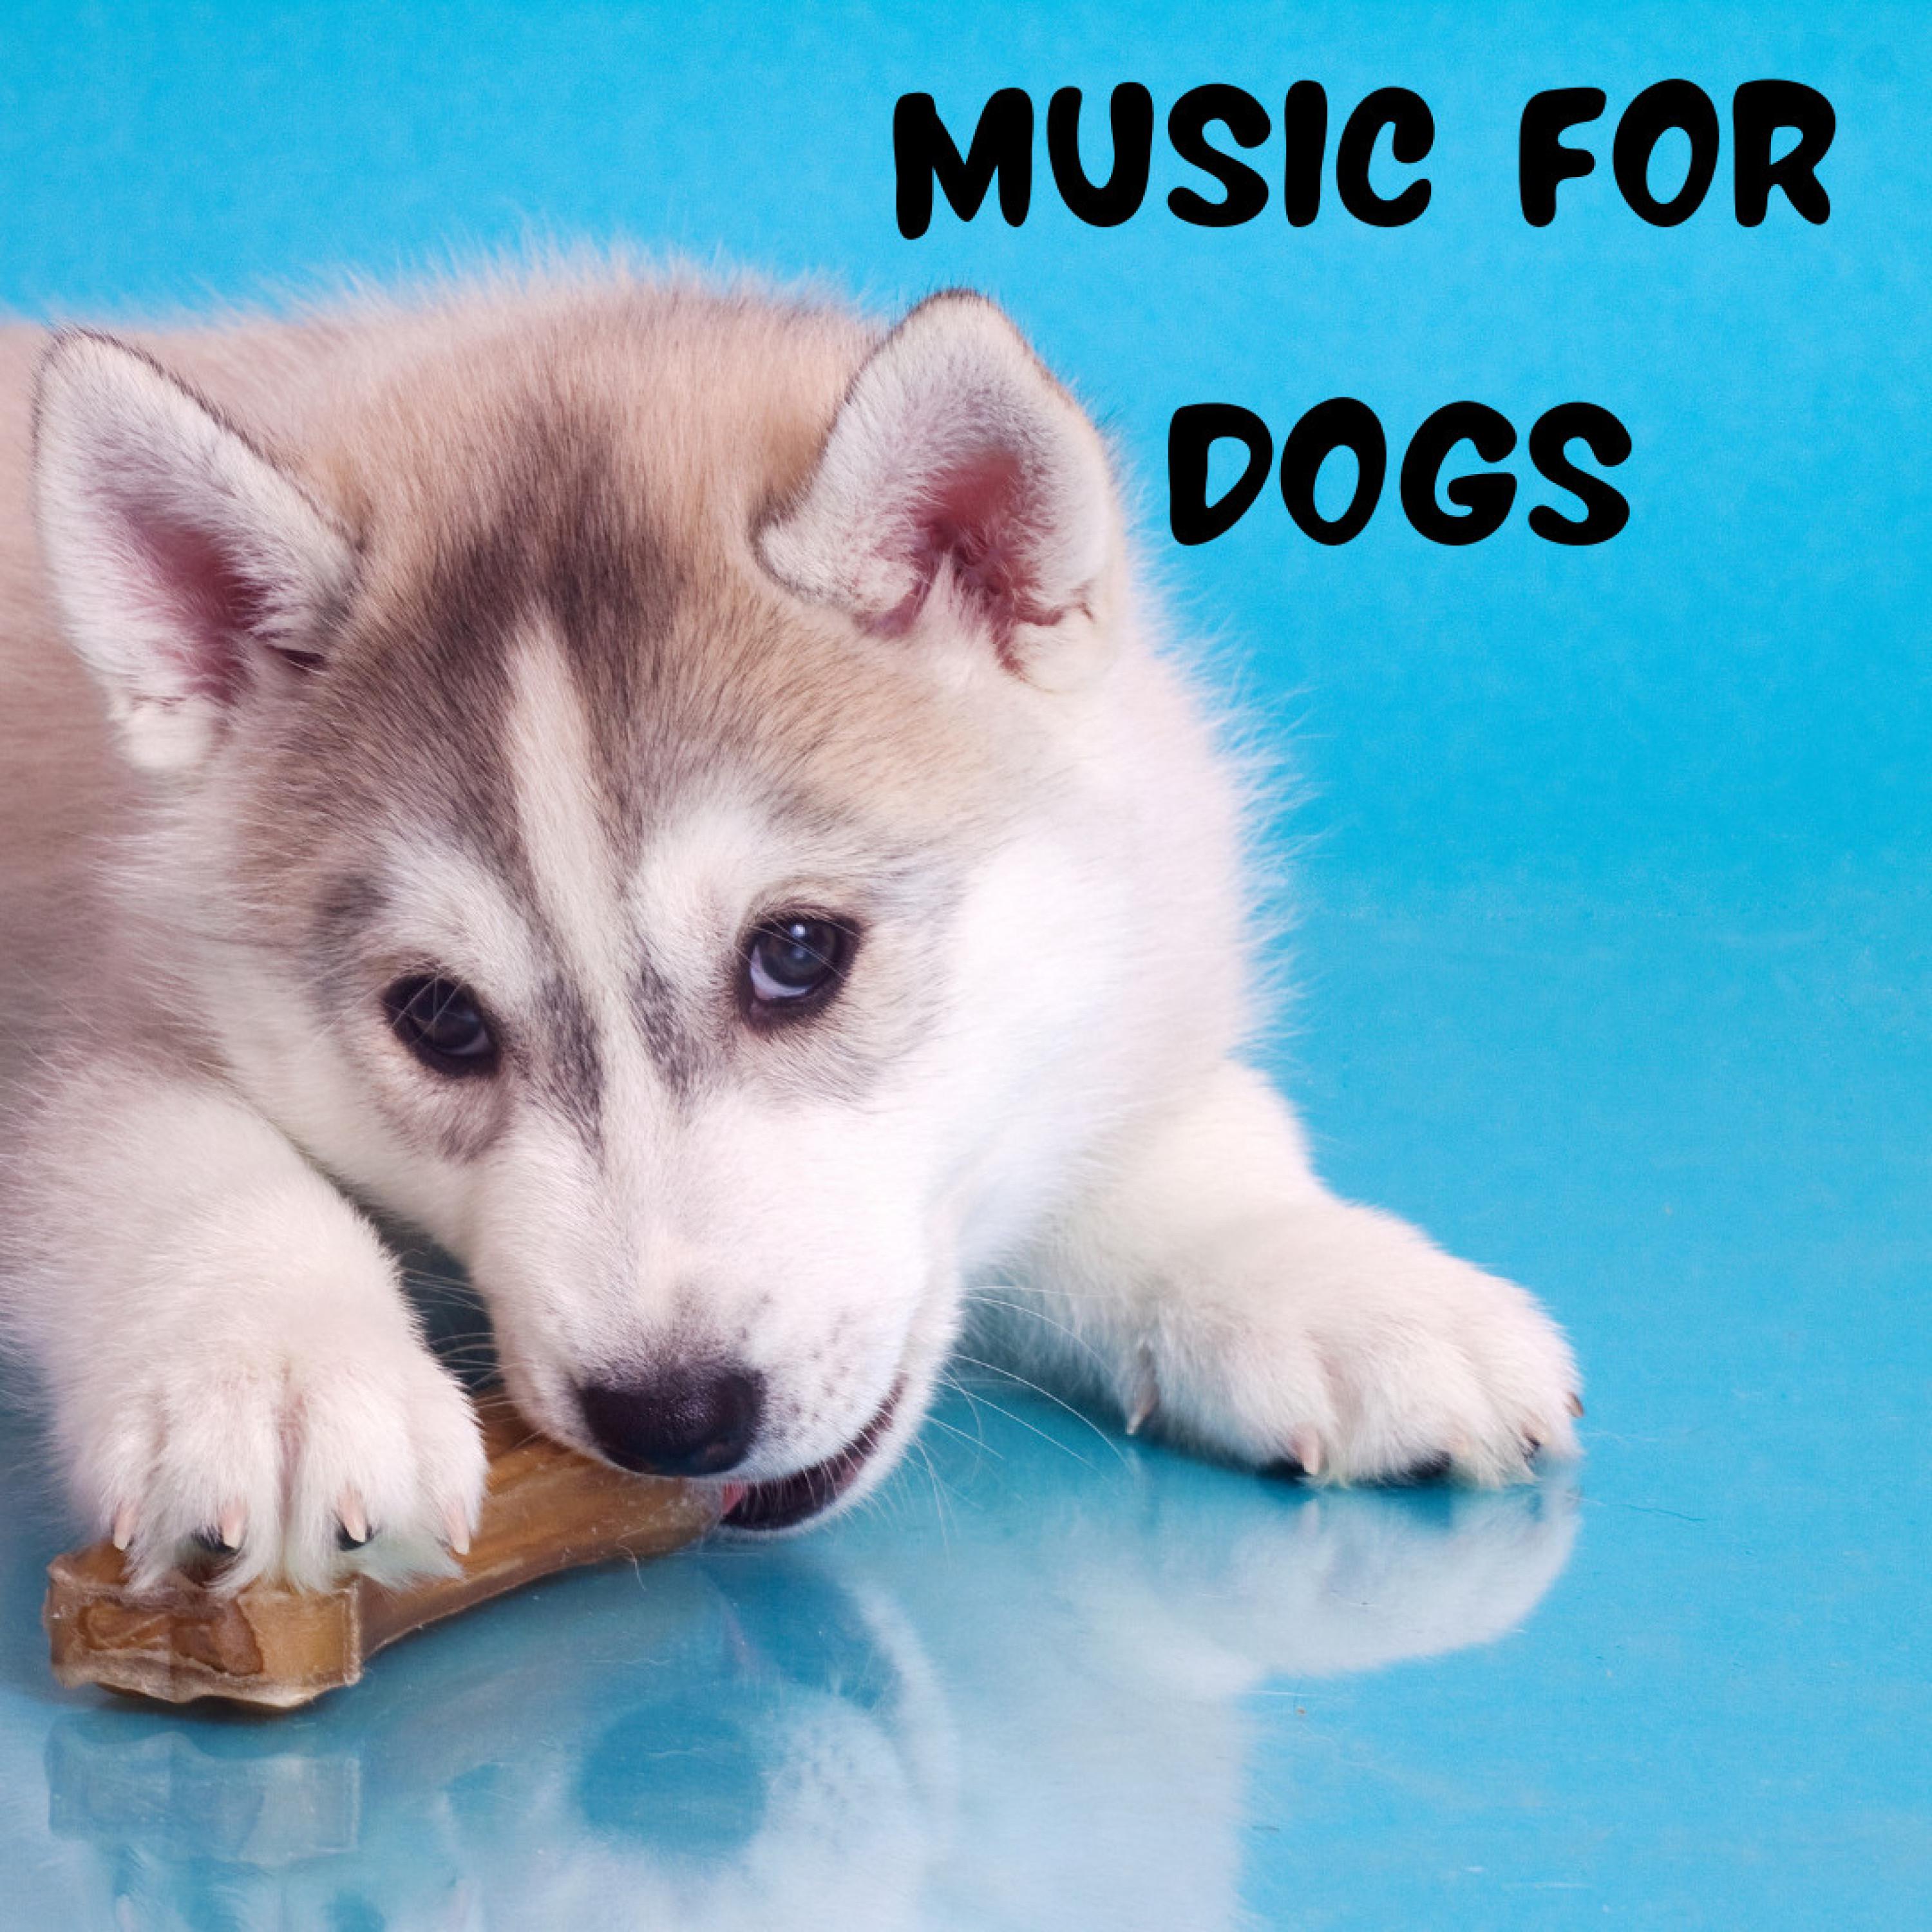 Music For Dogs - Calming Trance for Dogs